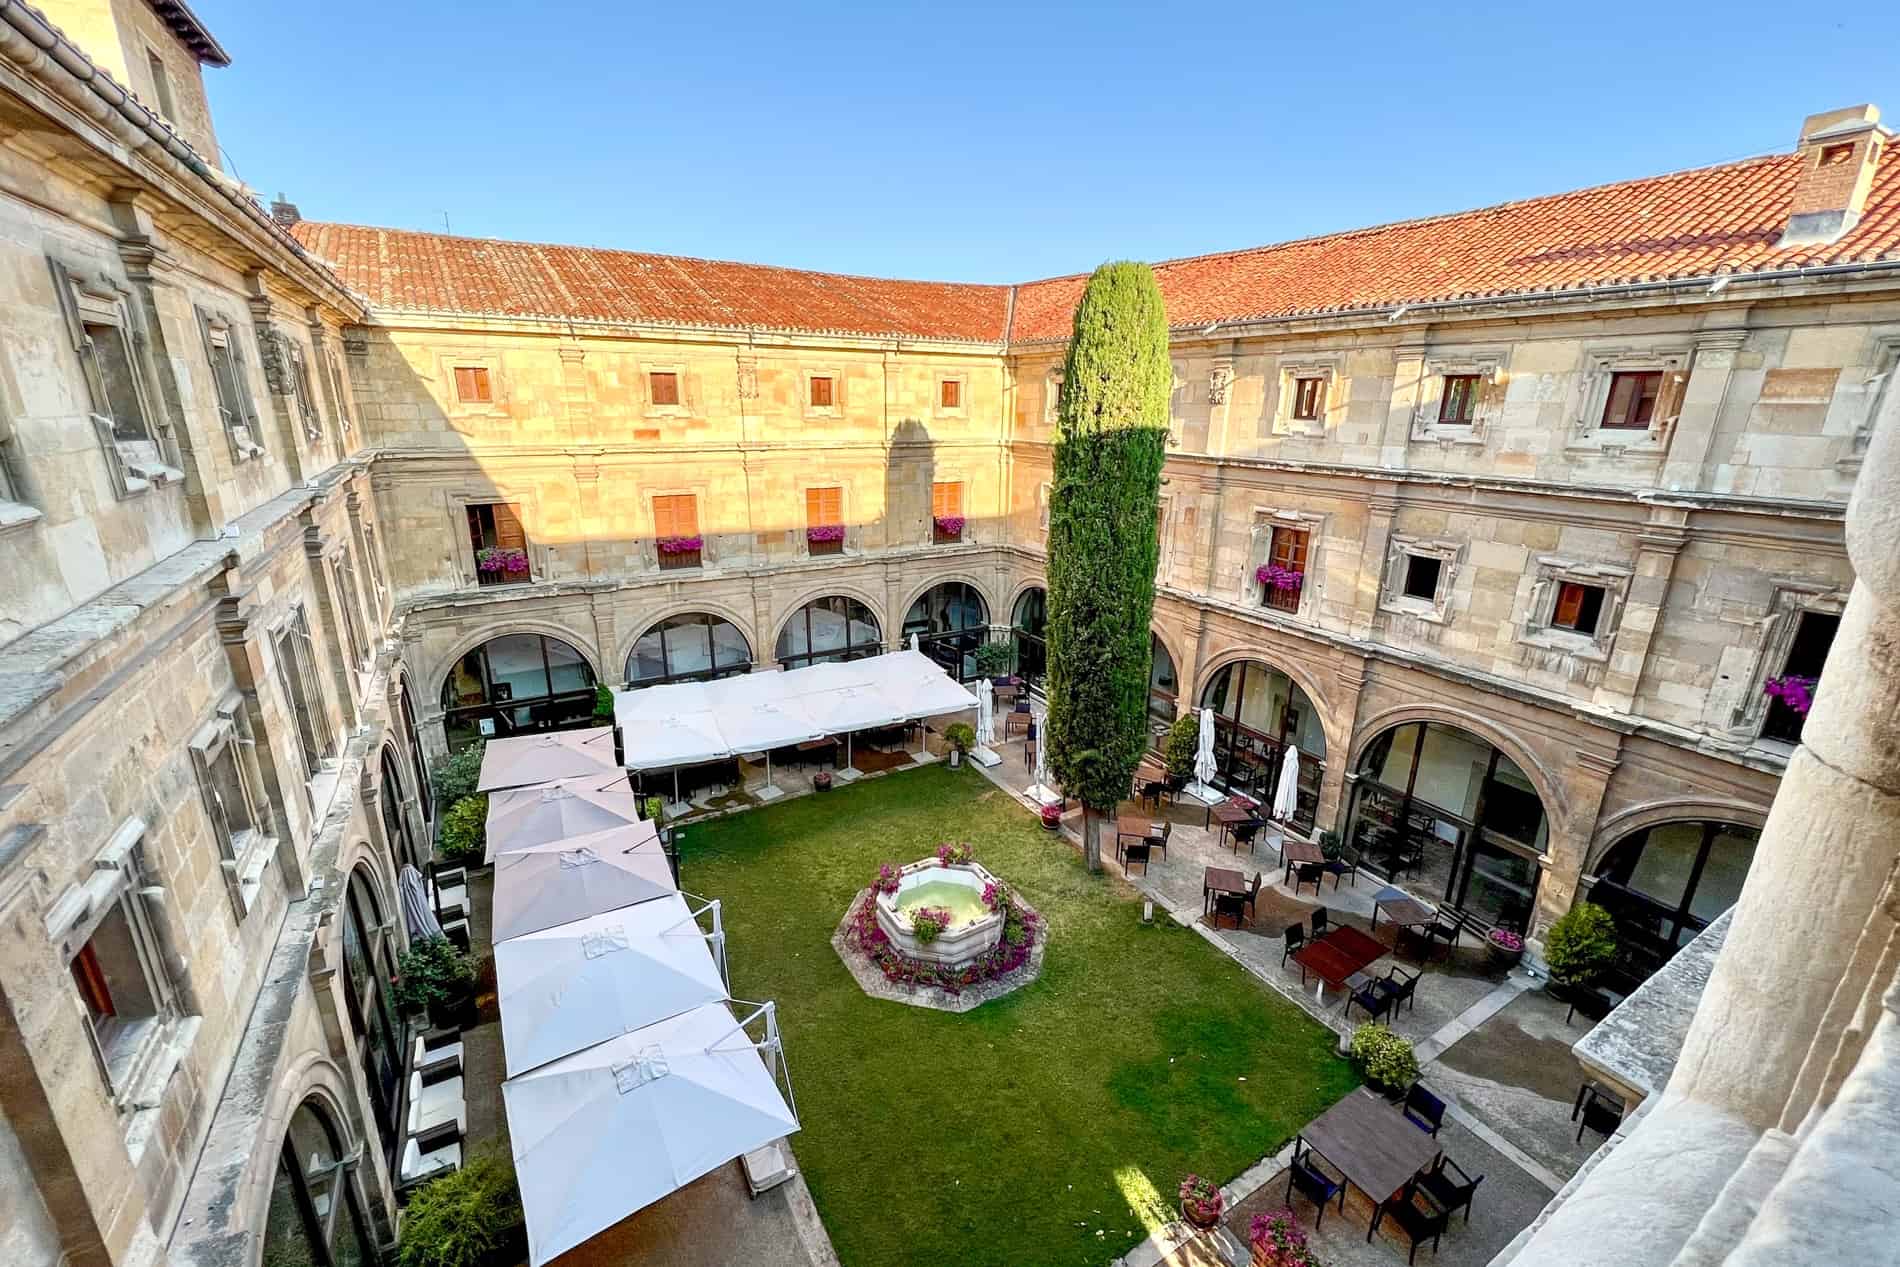 The golden stone arcade building and courtyard of the Hotel Real Colegiata San Isidoro in León.